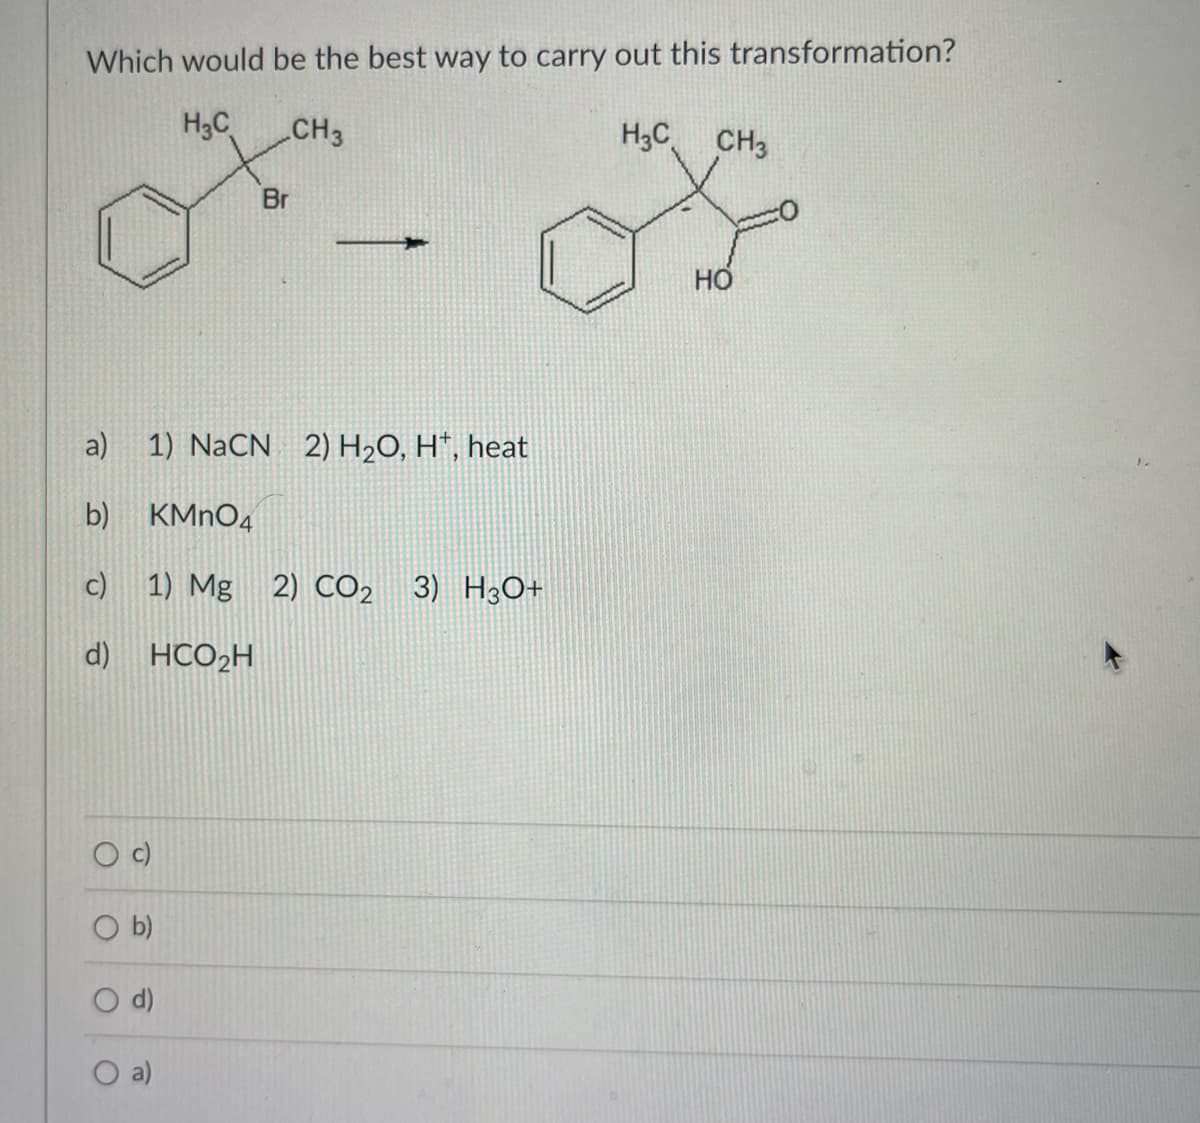 Which would be the best way to carry out this transformation?
H₂C
CH3
H₂C CH3
a)
b)
c)
d) HCO₂H
O b)
O
1) NaCN 2) H₂O, H, heat
KMnO4
1) Mg 2) CO2 3) H3O+
E
Br
НО